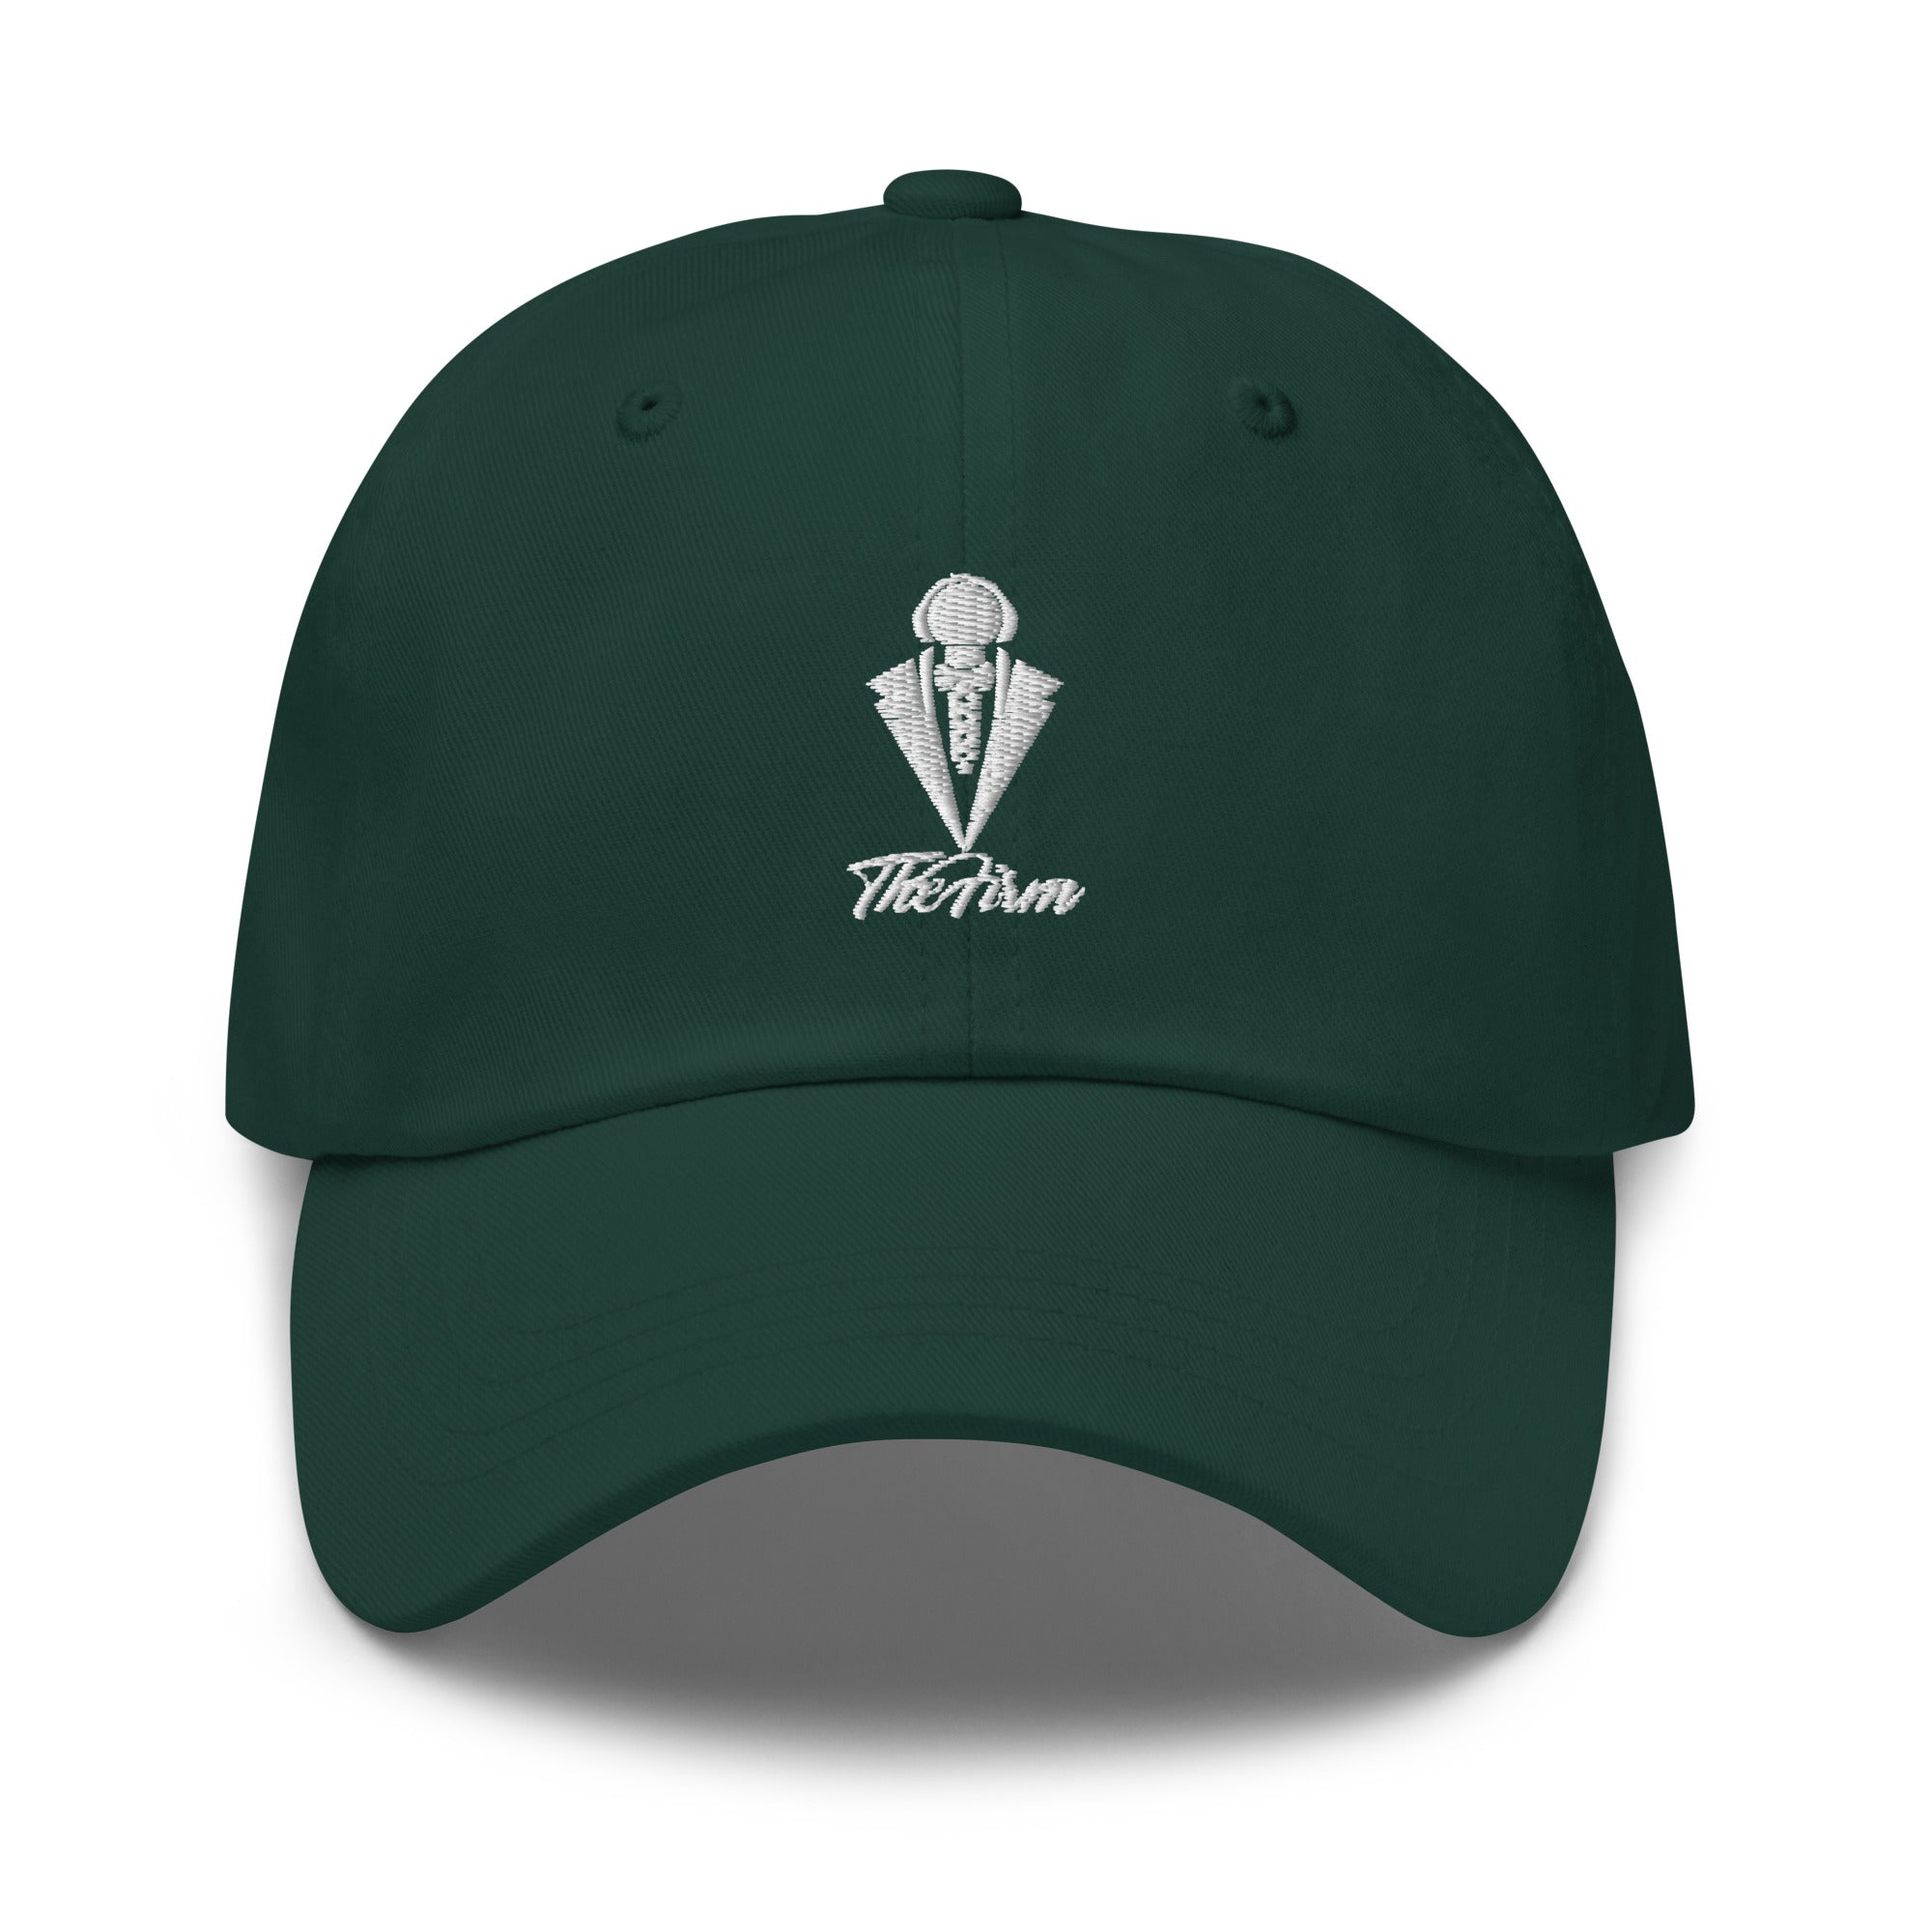 TheFirm - Dad hat